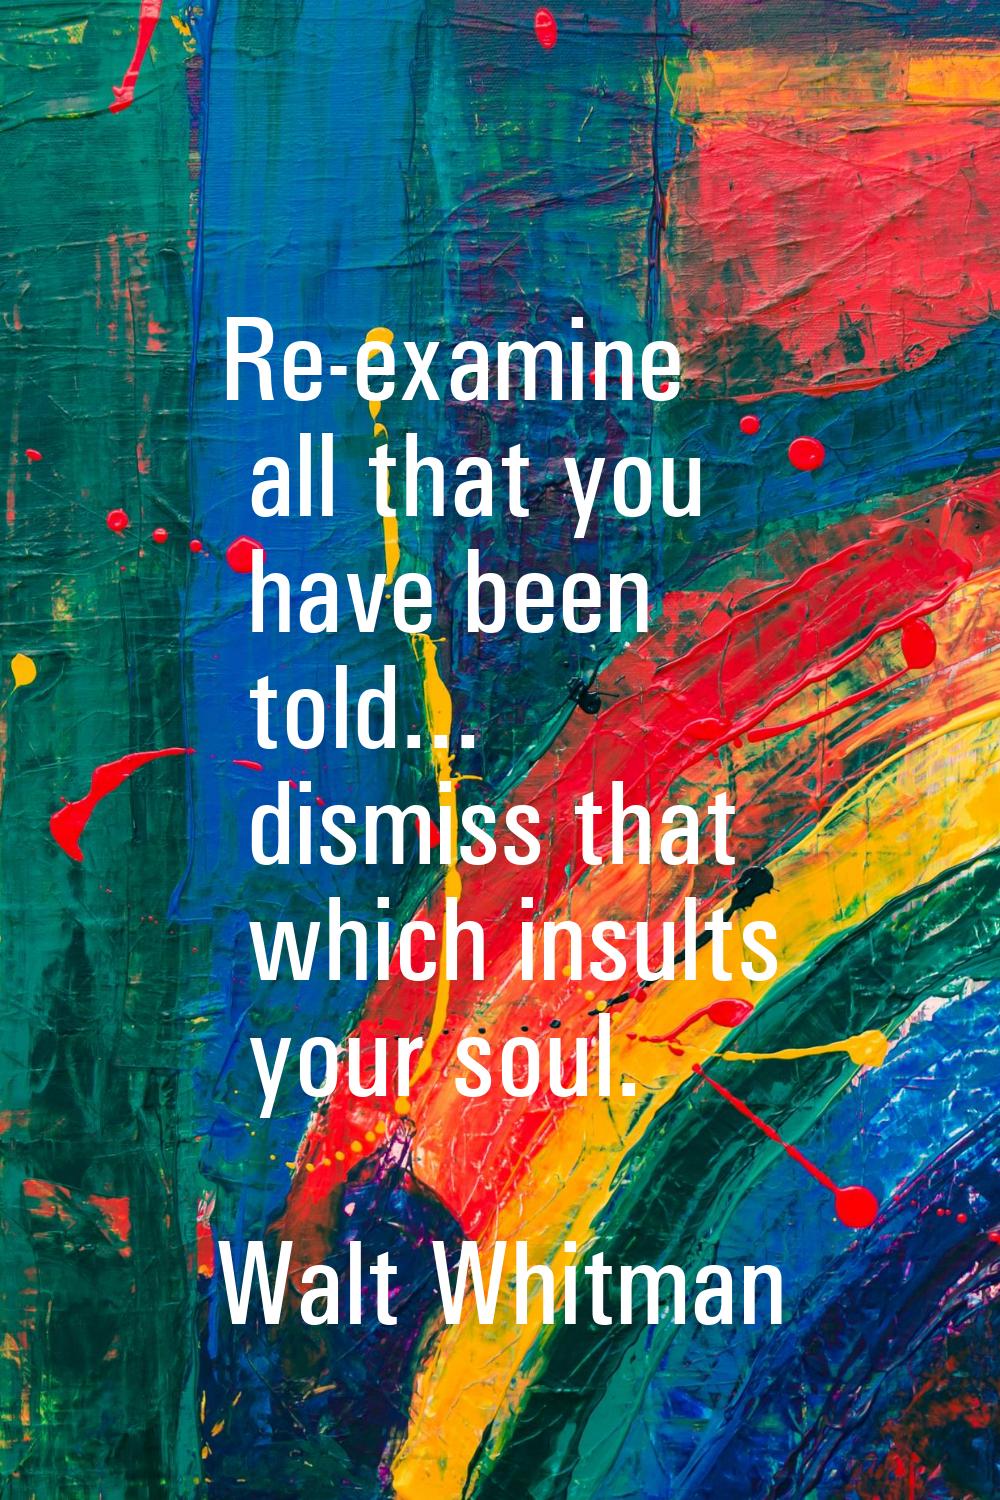 Re-examine all that you have been told... dismiss that which insults your soul.